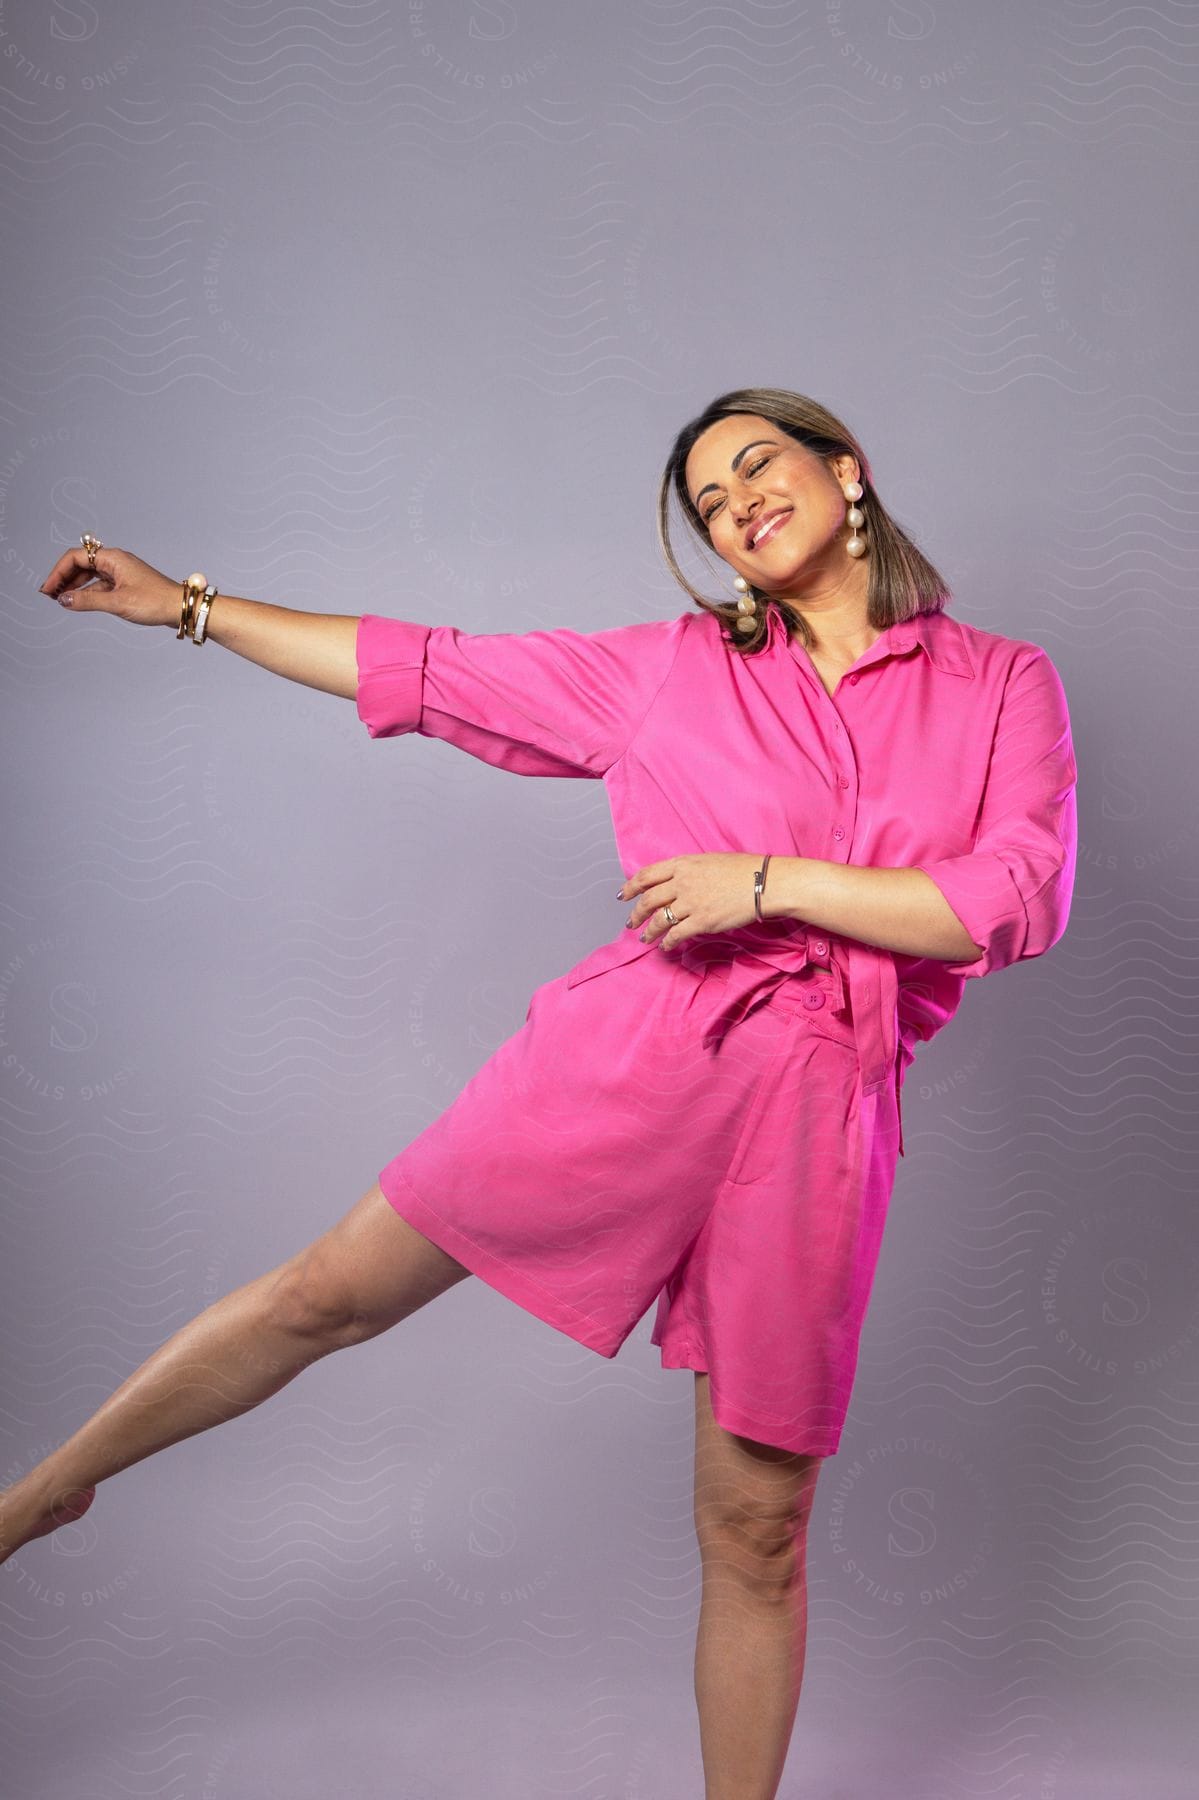 A smiling woman wearing a pink jumpsuit during a photo shoot.